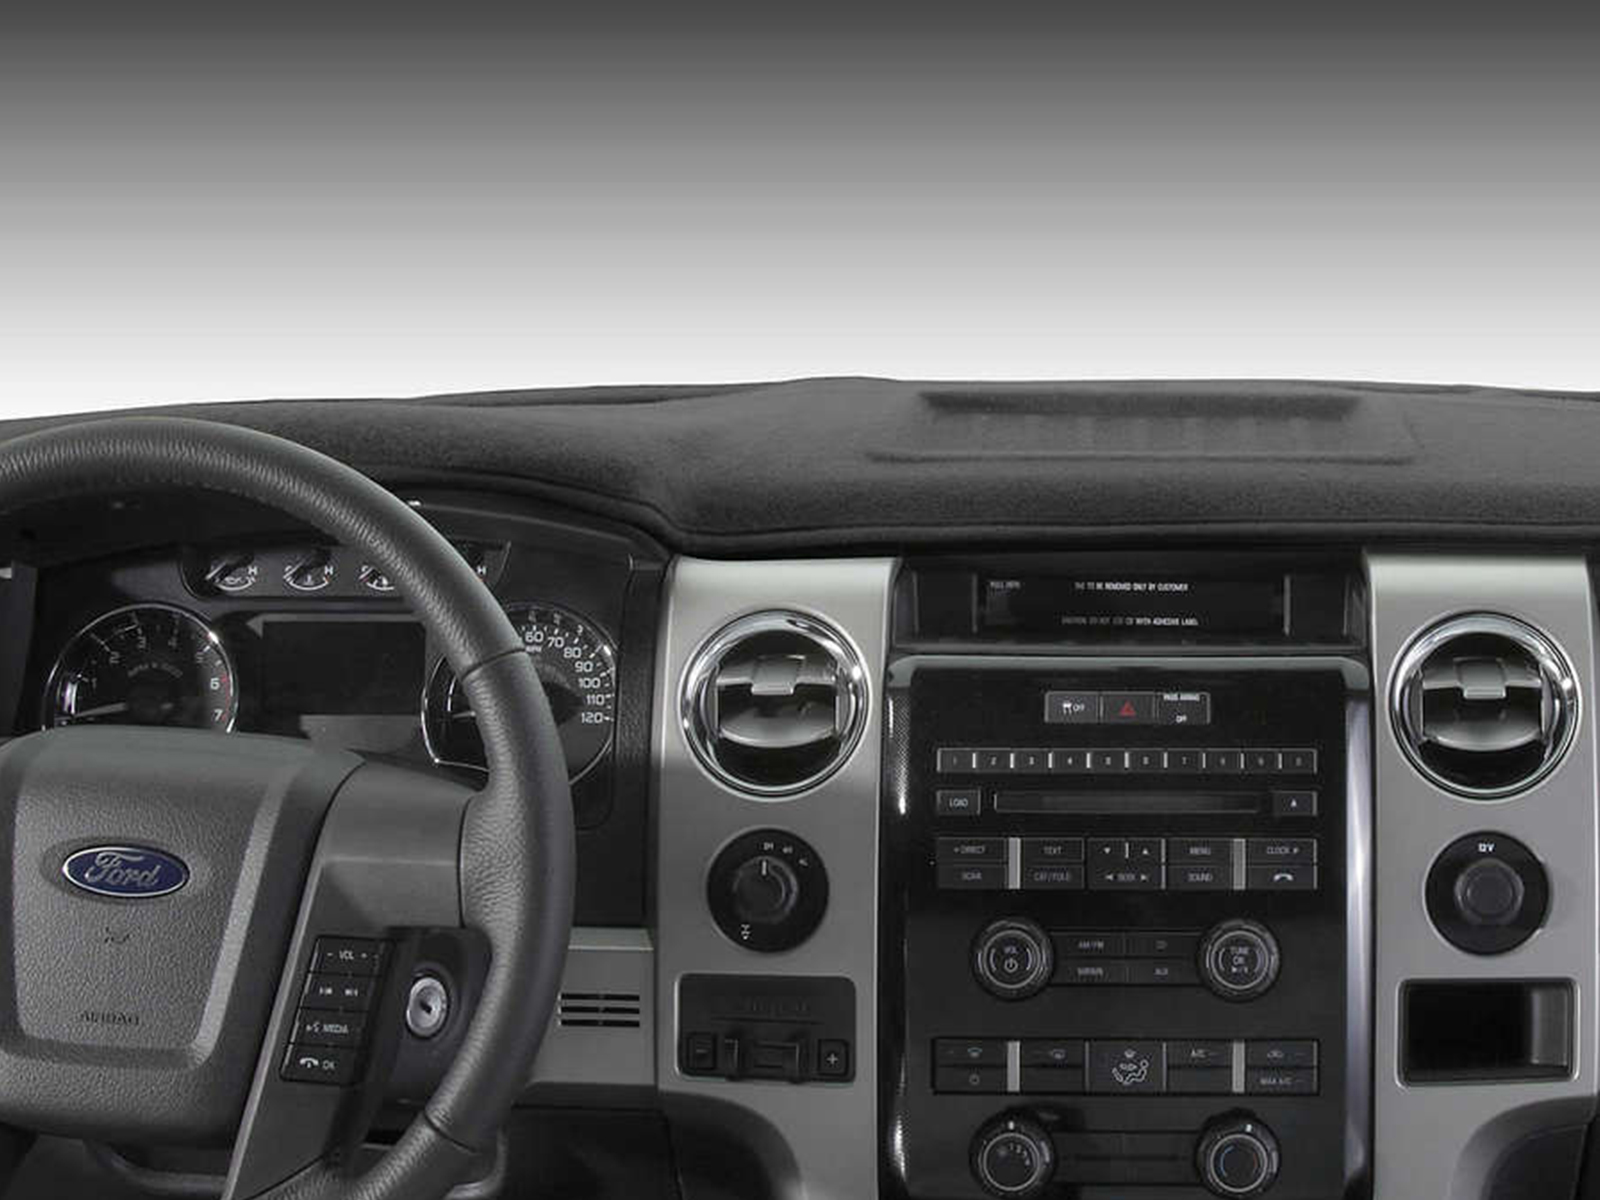 1990 Dodge Ramcharger Dash Covers RealTruck